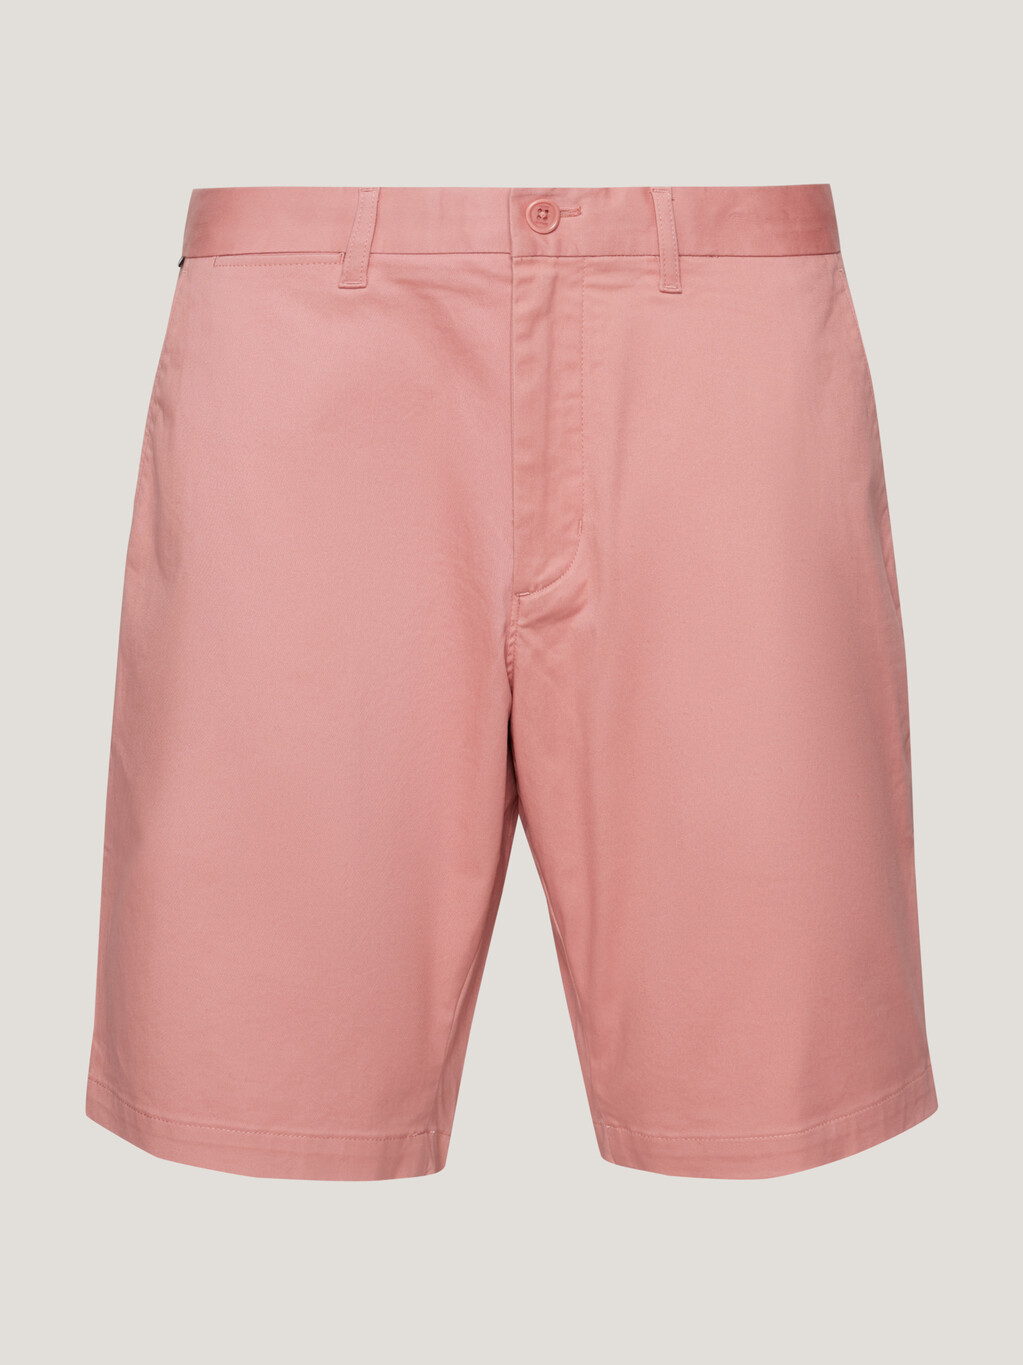 1985 Collection Harlem Relaxed Shorts, Teaberry Blossom, hi-res